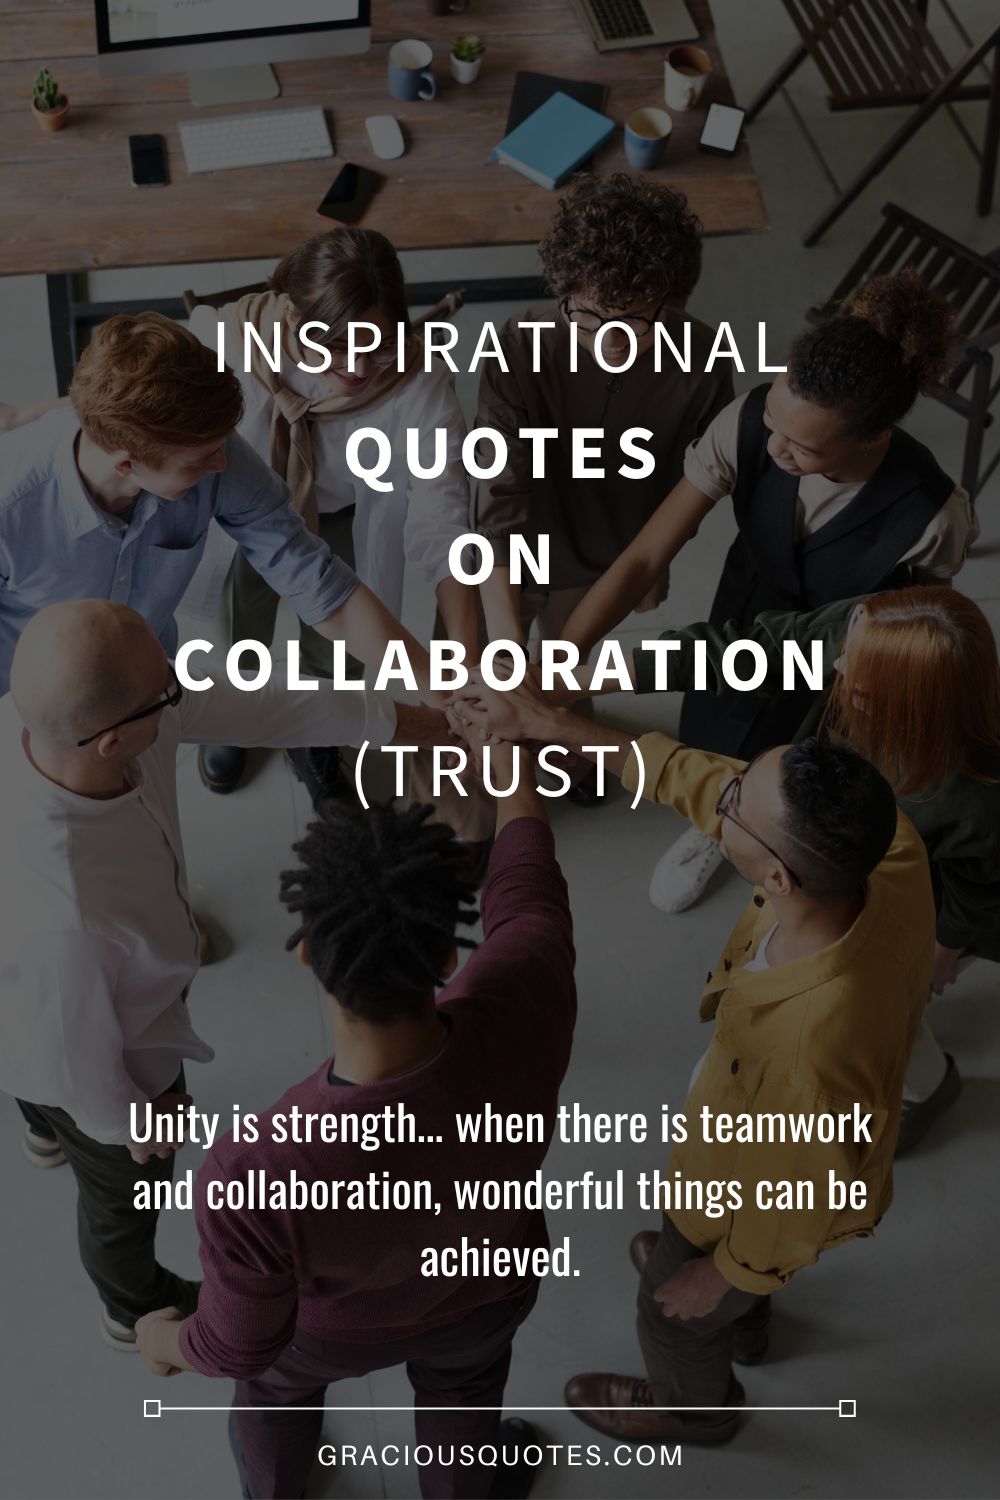 Inspirational Quotes on Collaboration (TRUST) - Gracious Quotes